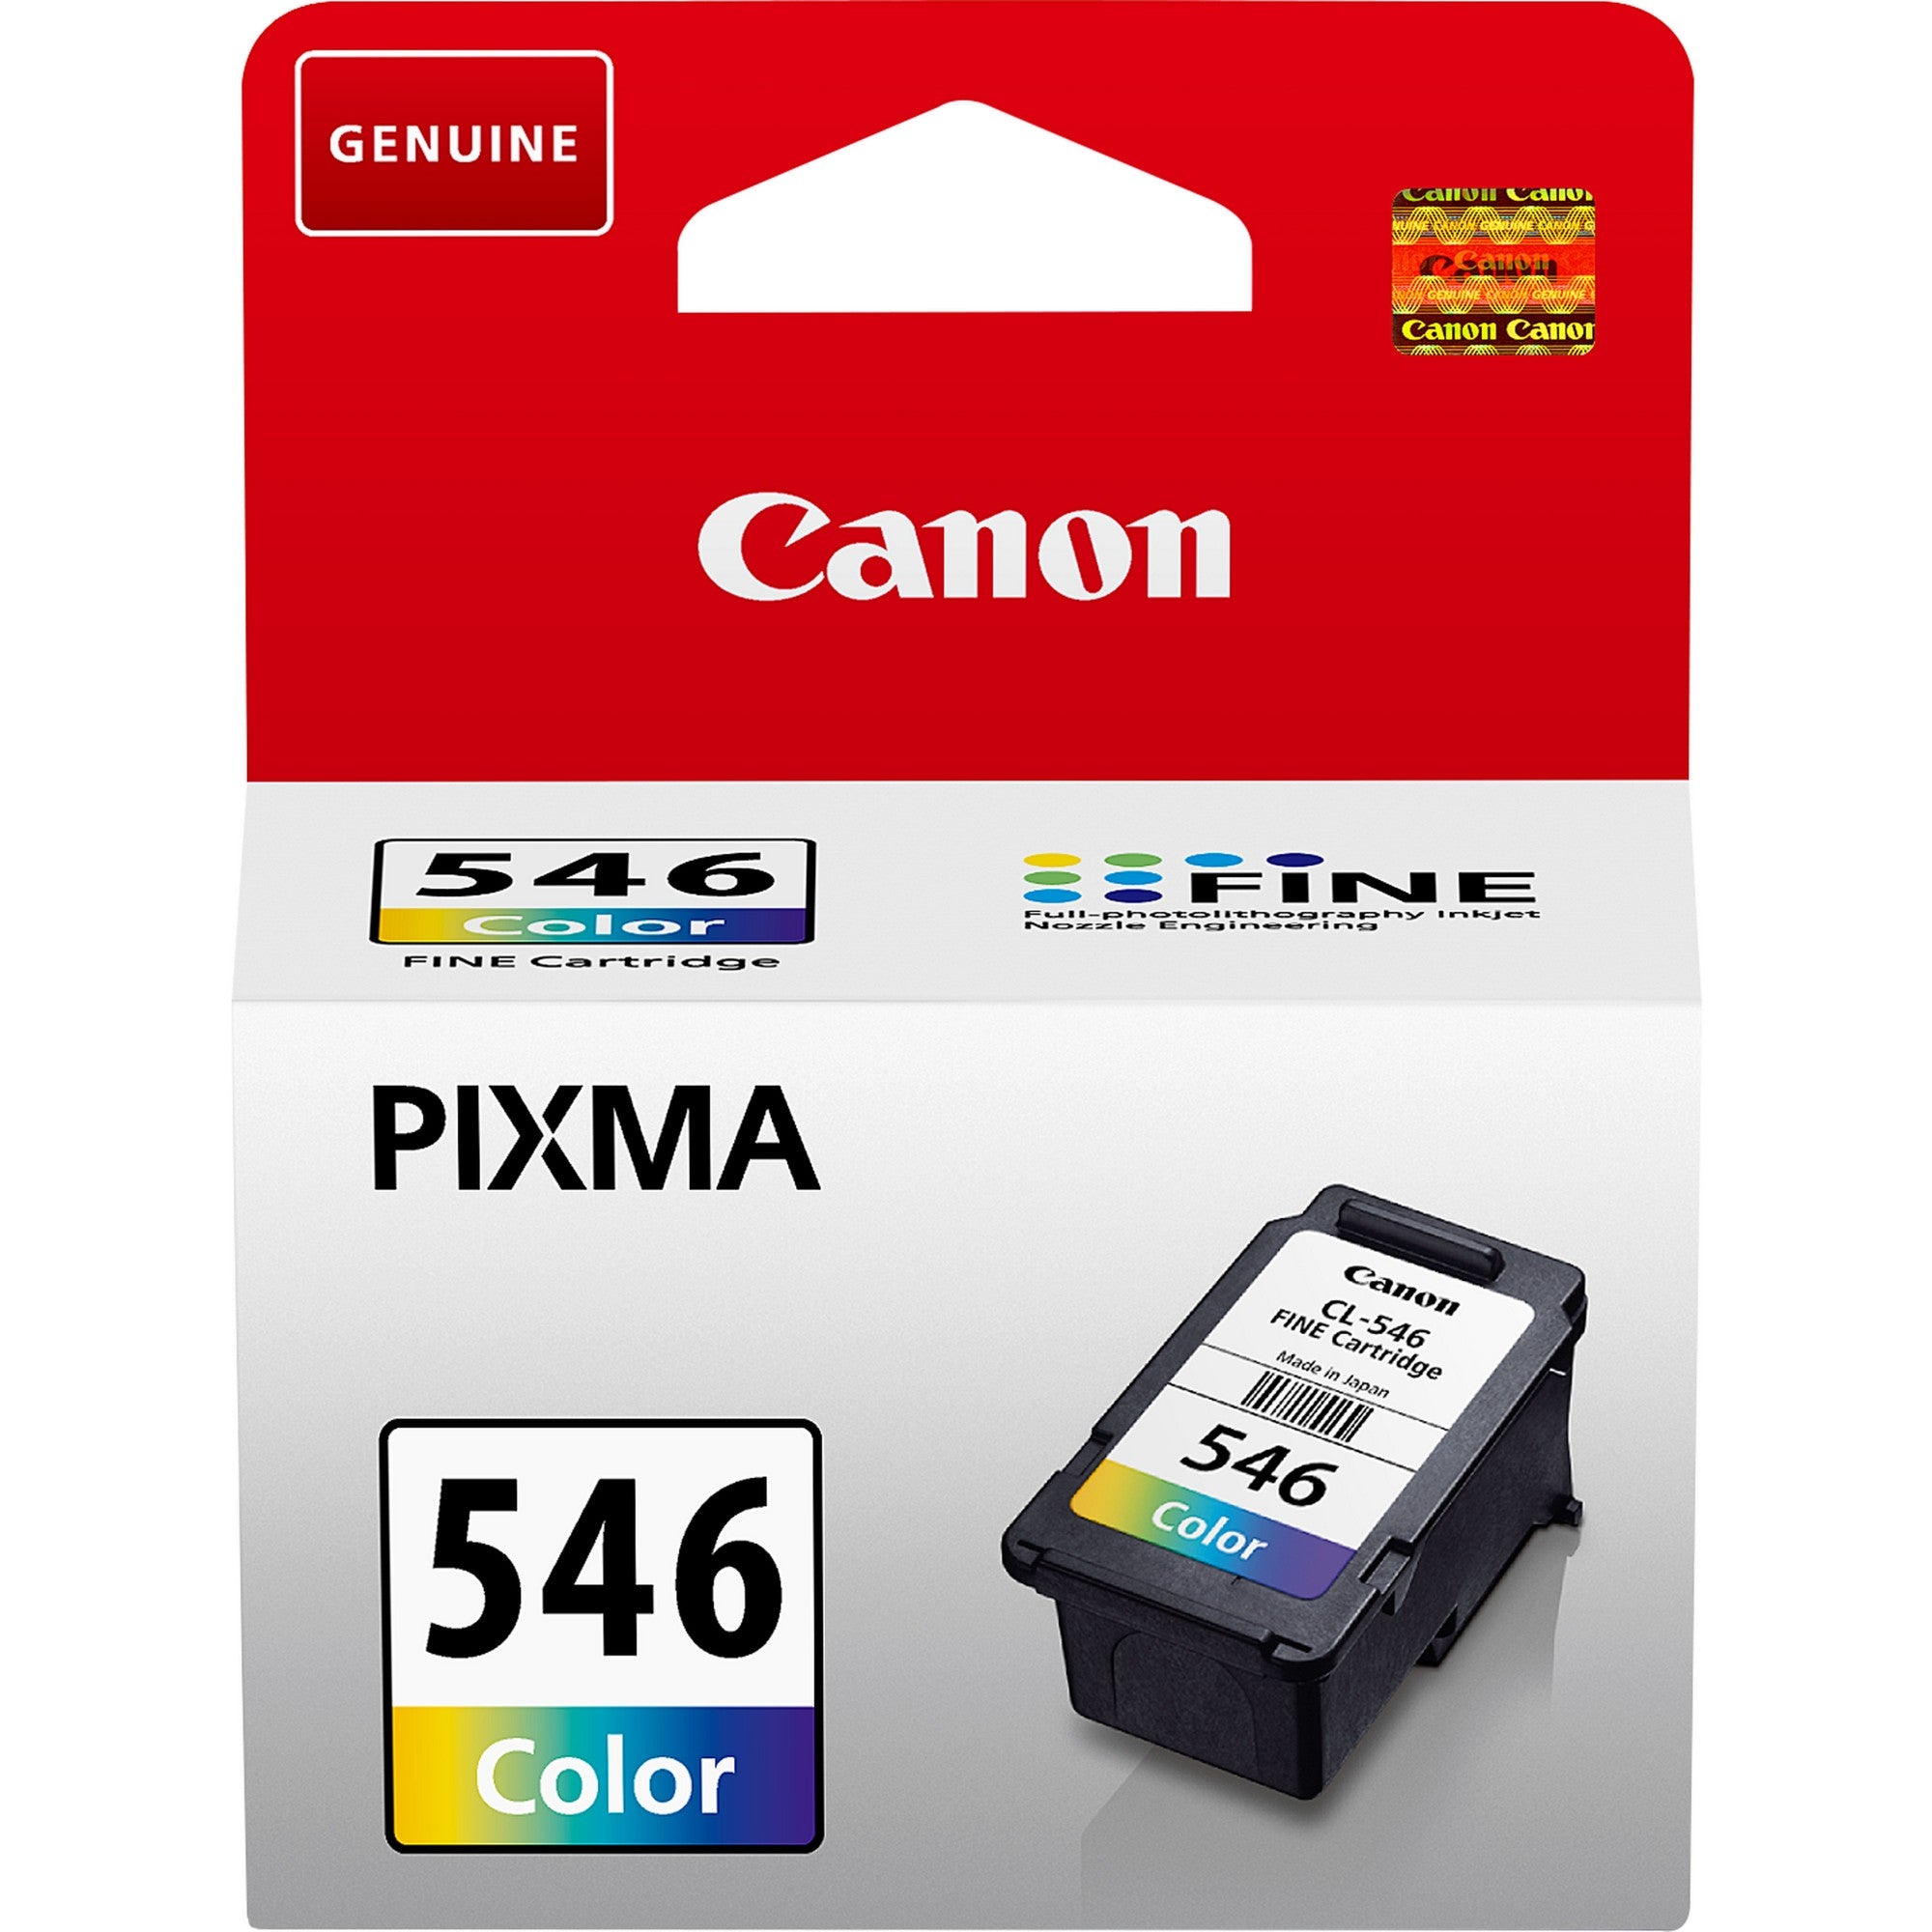 Canon 8289B001/CL-546 Printhead cartridge color, 180 pages ISO/IEC 24711 8ml for Canon Pixma MG 2450